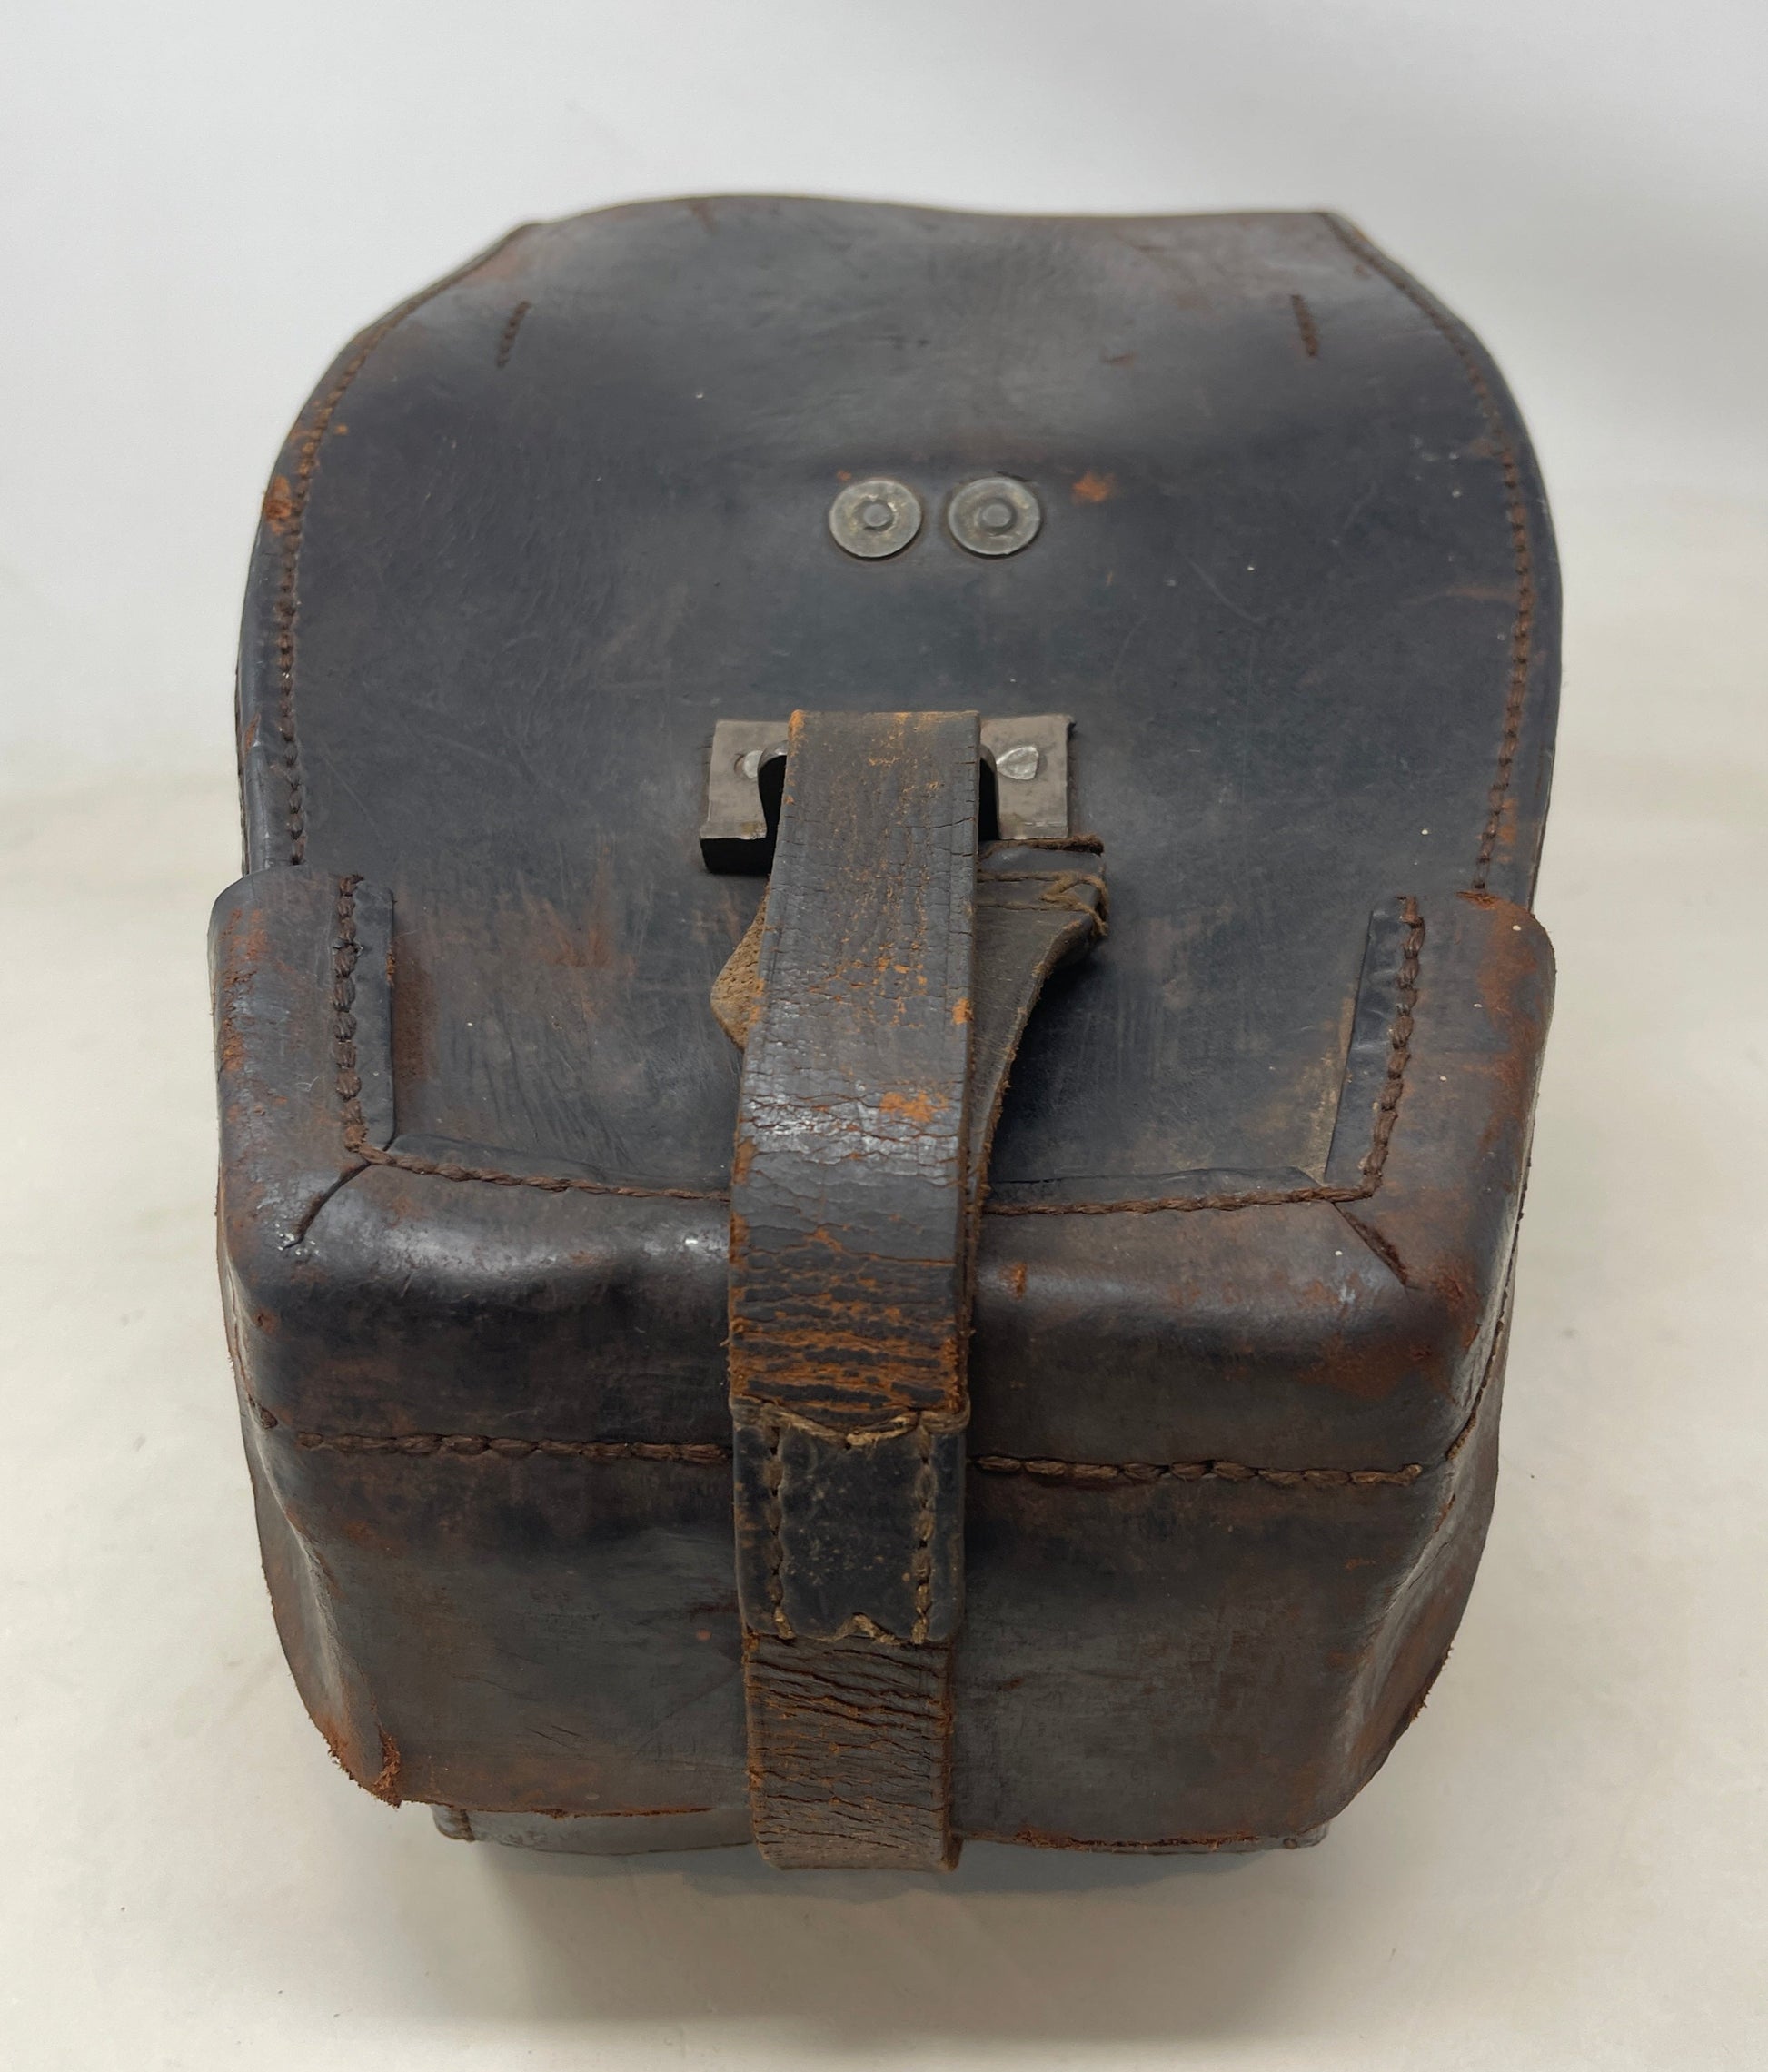 Artillery Gun Sight No7 MkII by Ross, Dated 1918 and Original Leather Carrying Case